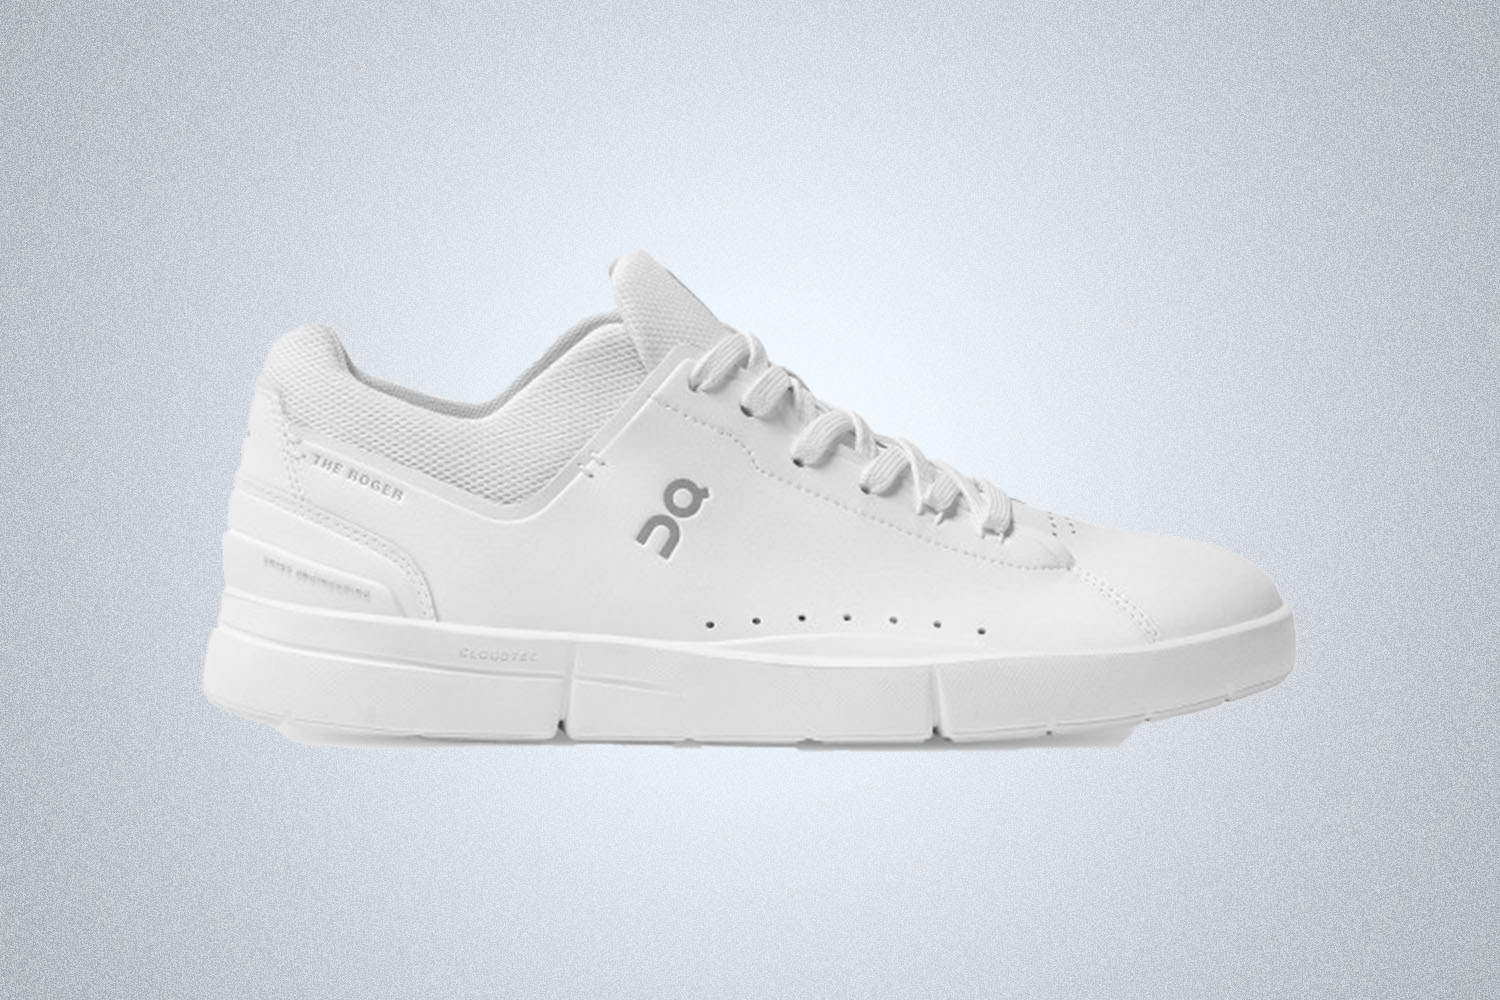 a pair of white On tennis shoes on a grey background